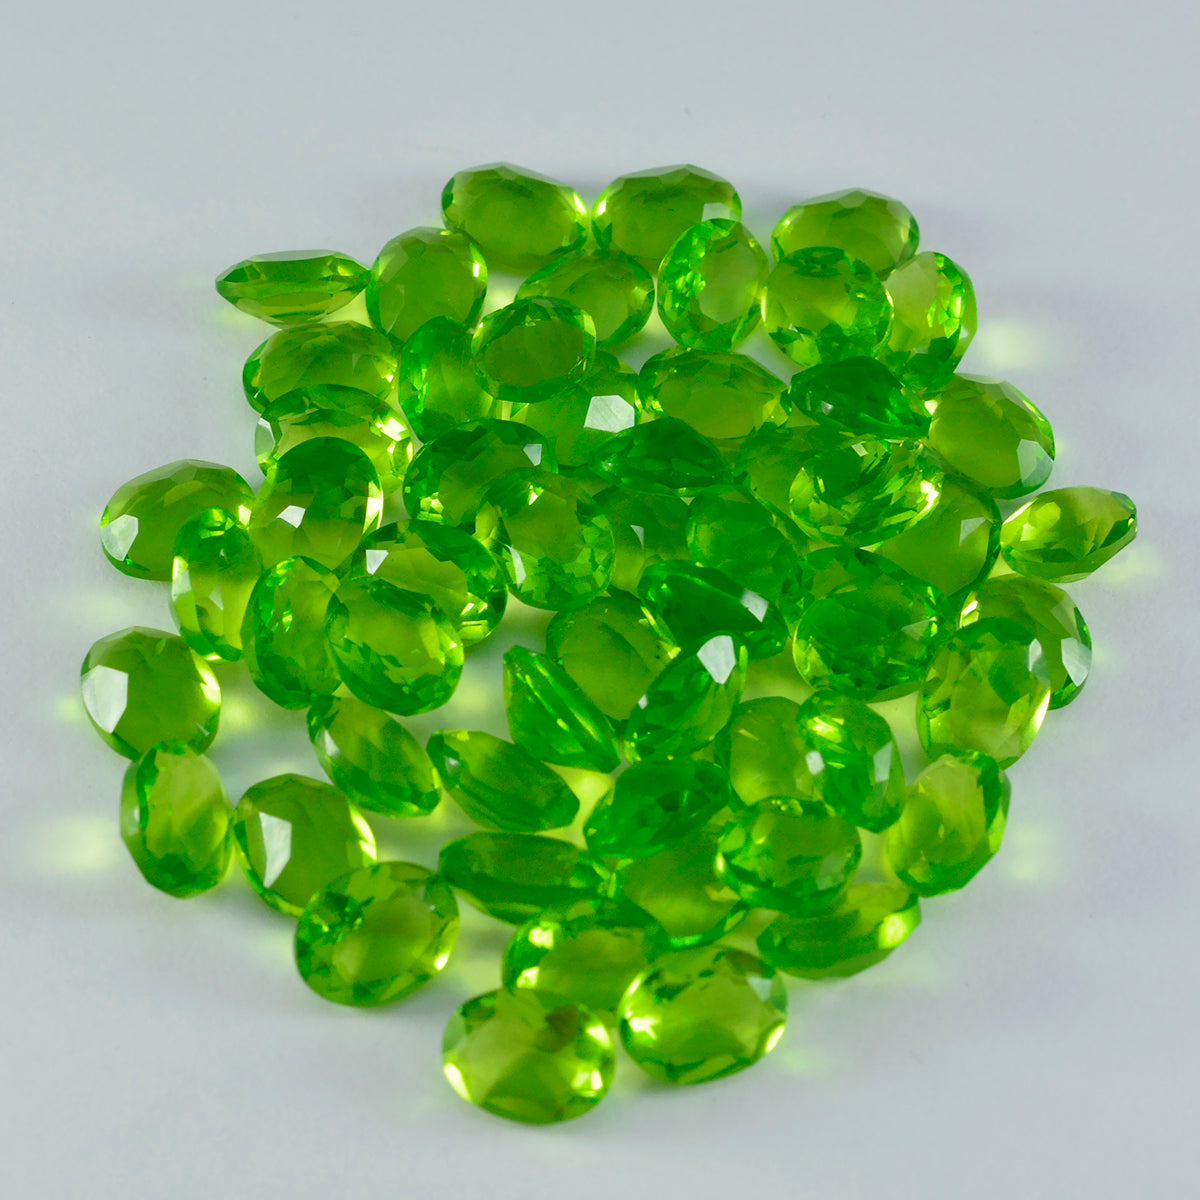 Riyogems 1PC Green Peridot CZ Faceted 5x7 mm Oval Shape handsome Quality Loose Gems